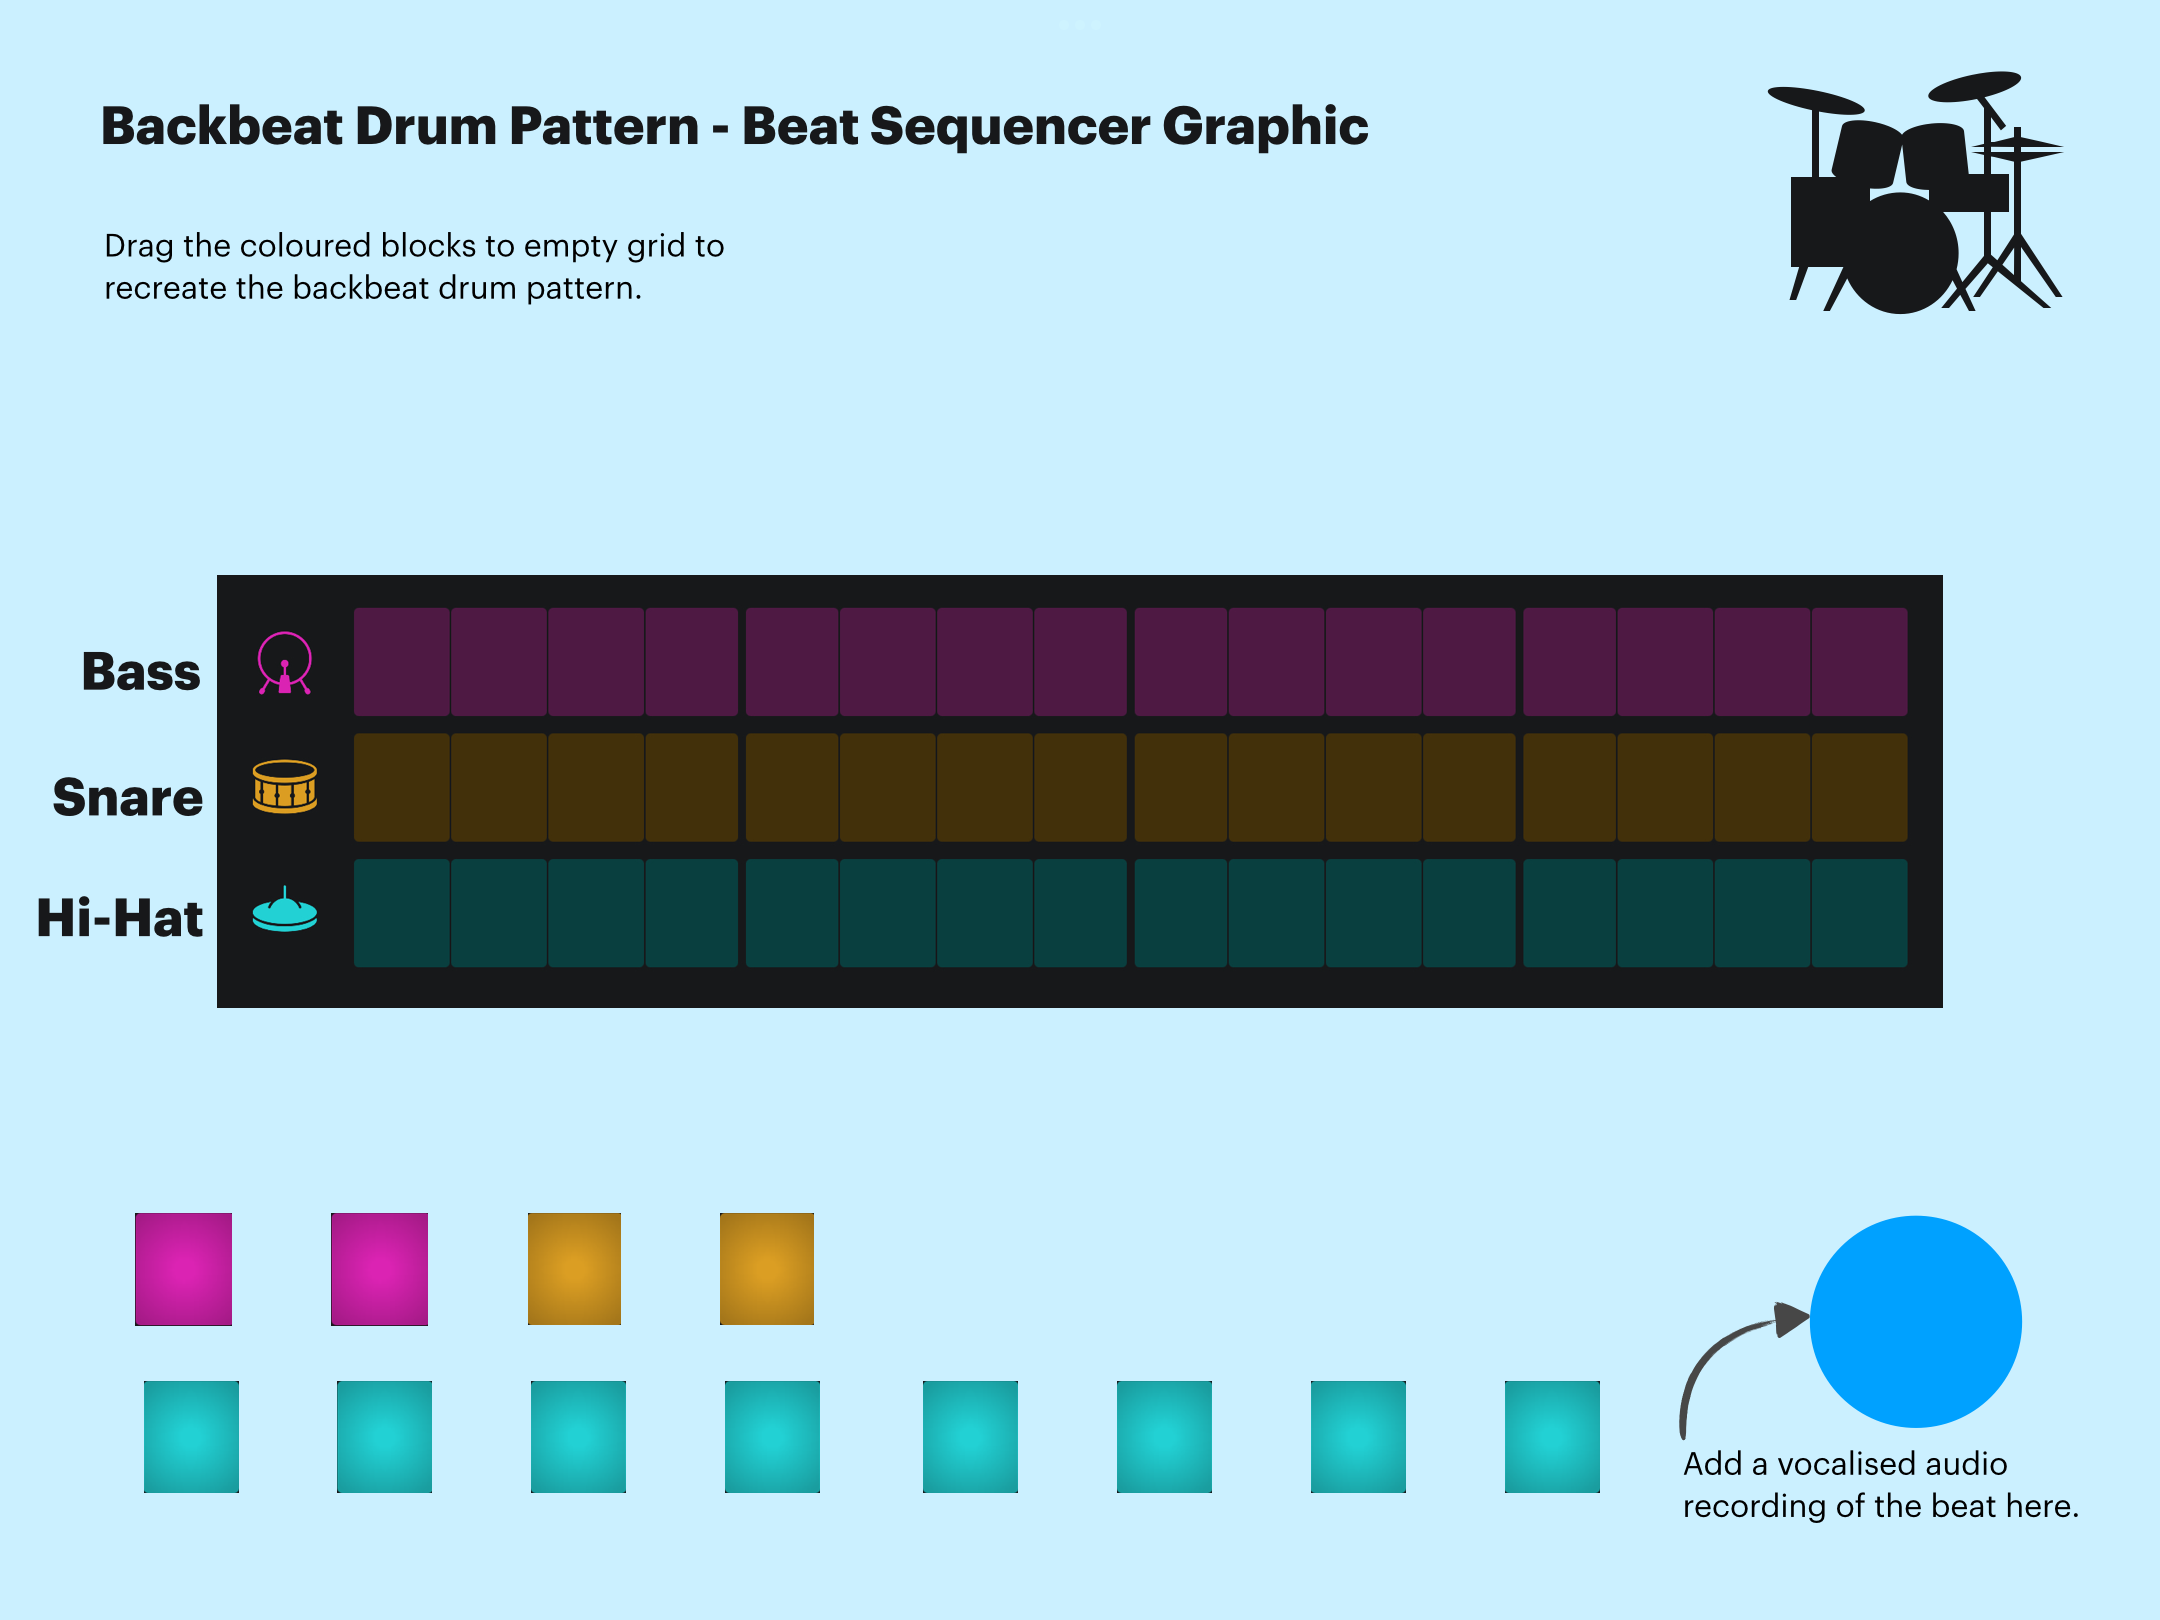 Screenshot from Backbeat Keynote journal. Coloured steps can be dragged to a drum grid to recreate a backbeat drum pattern. 